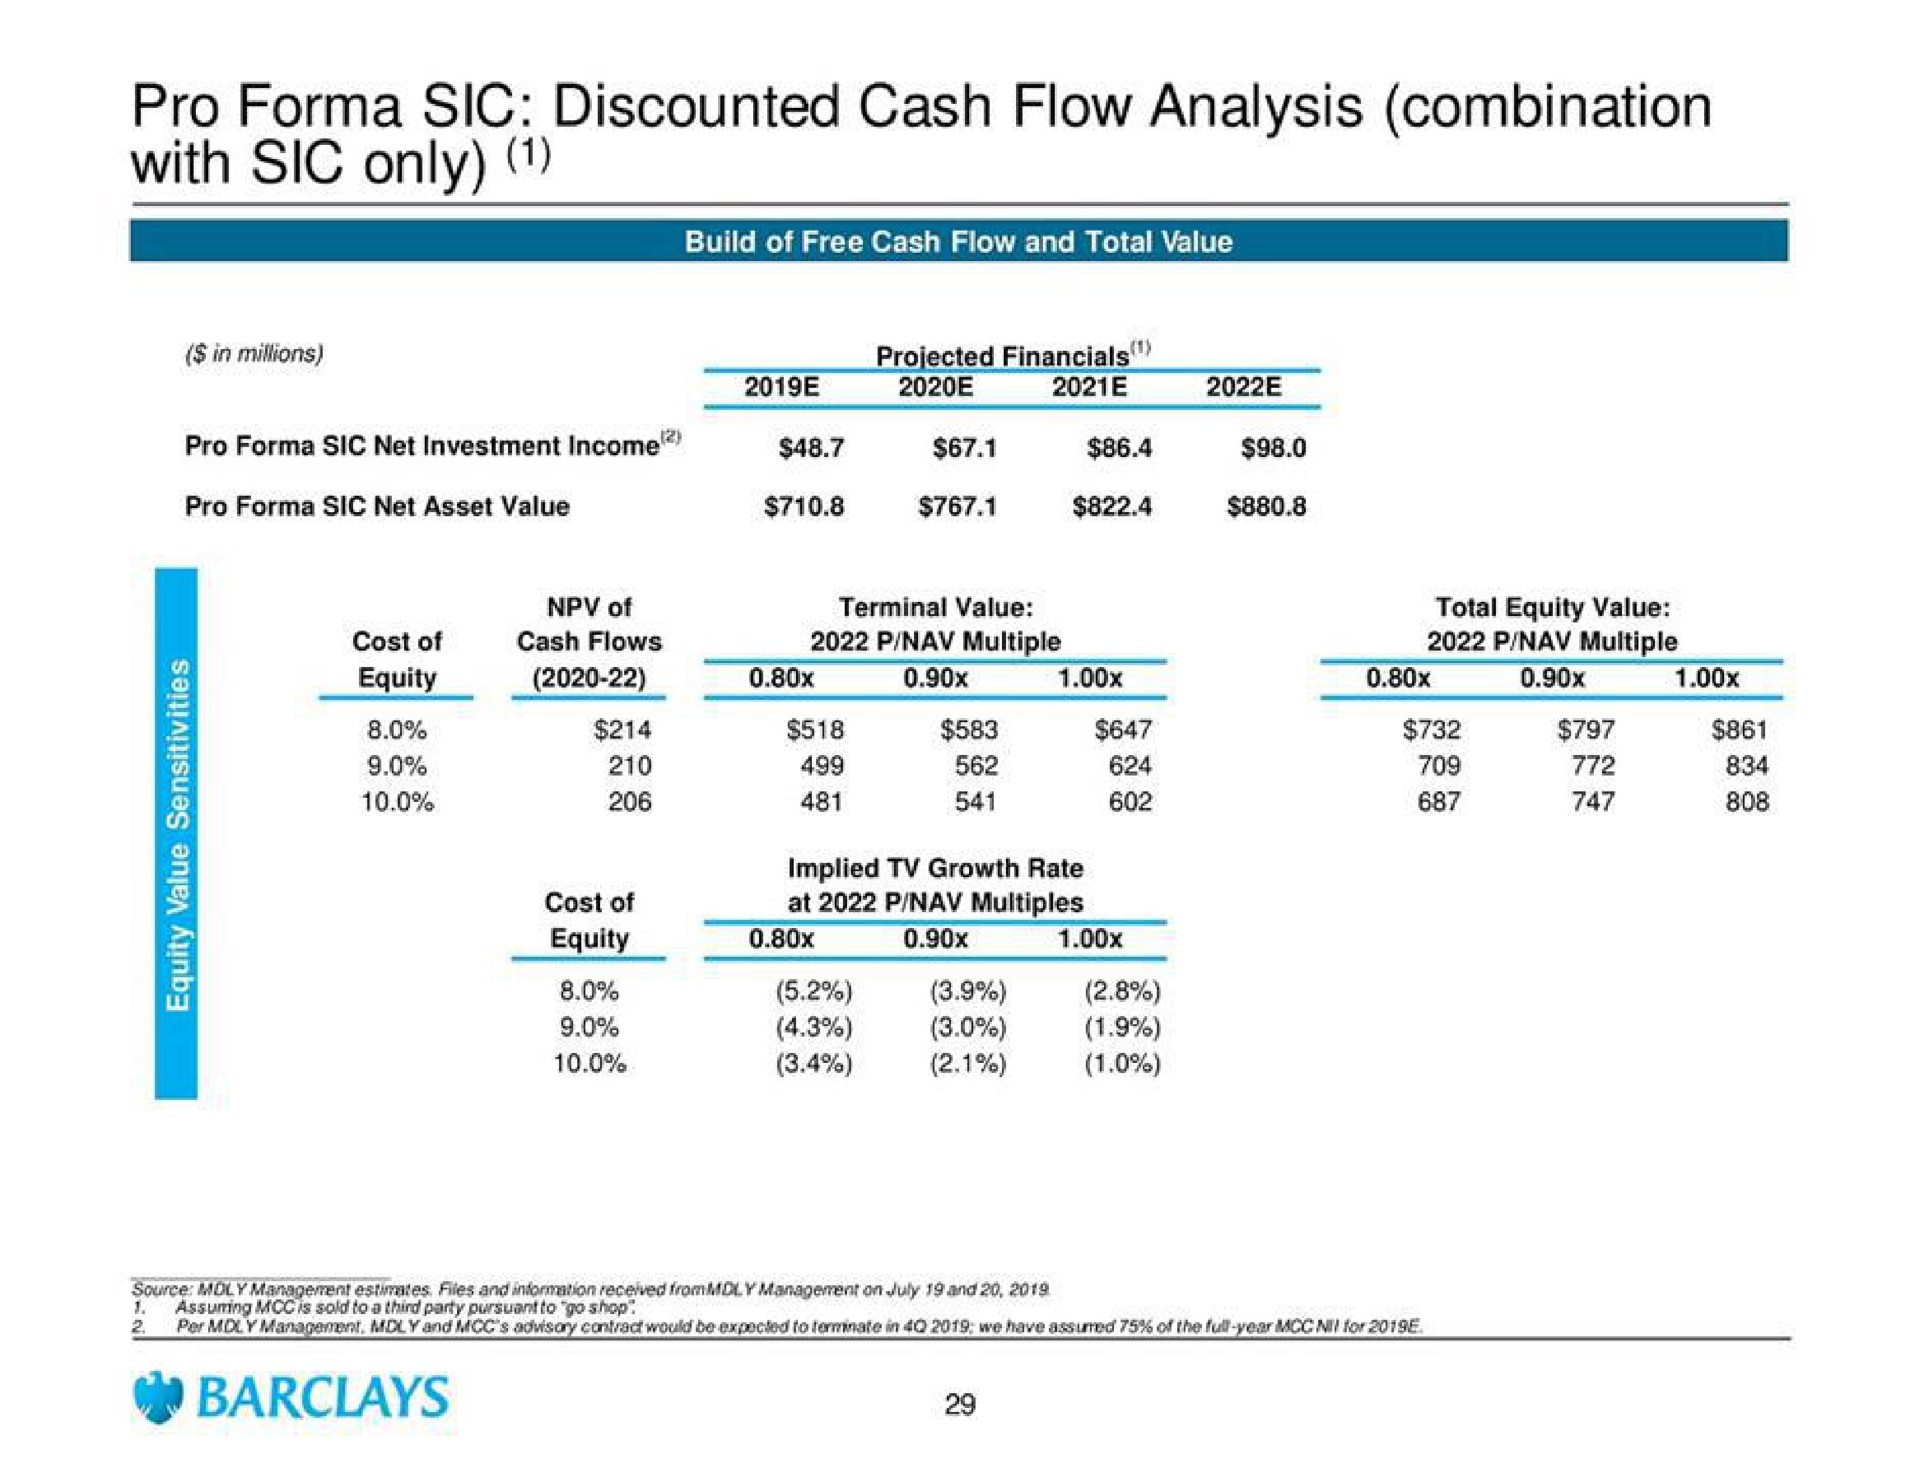 pro sic discounted cash flow analysis combination with sic only | Barclays